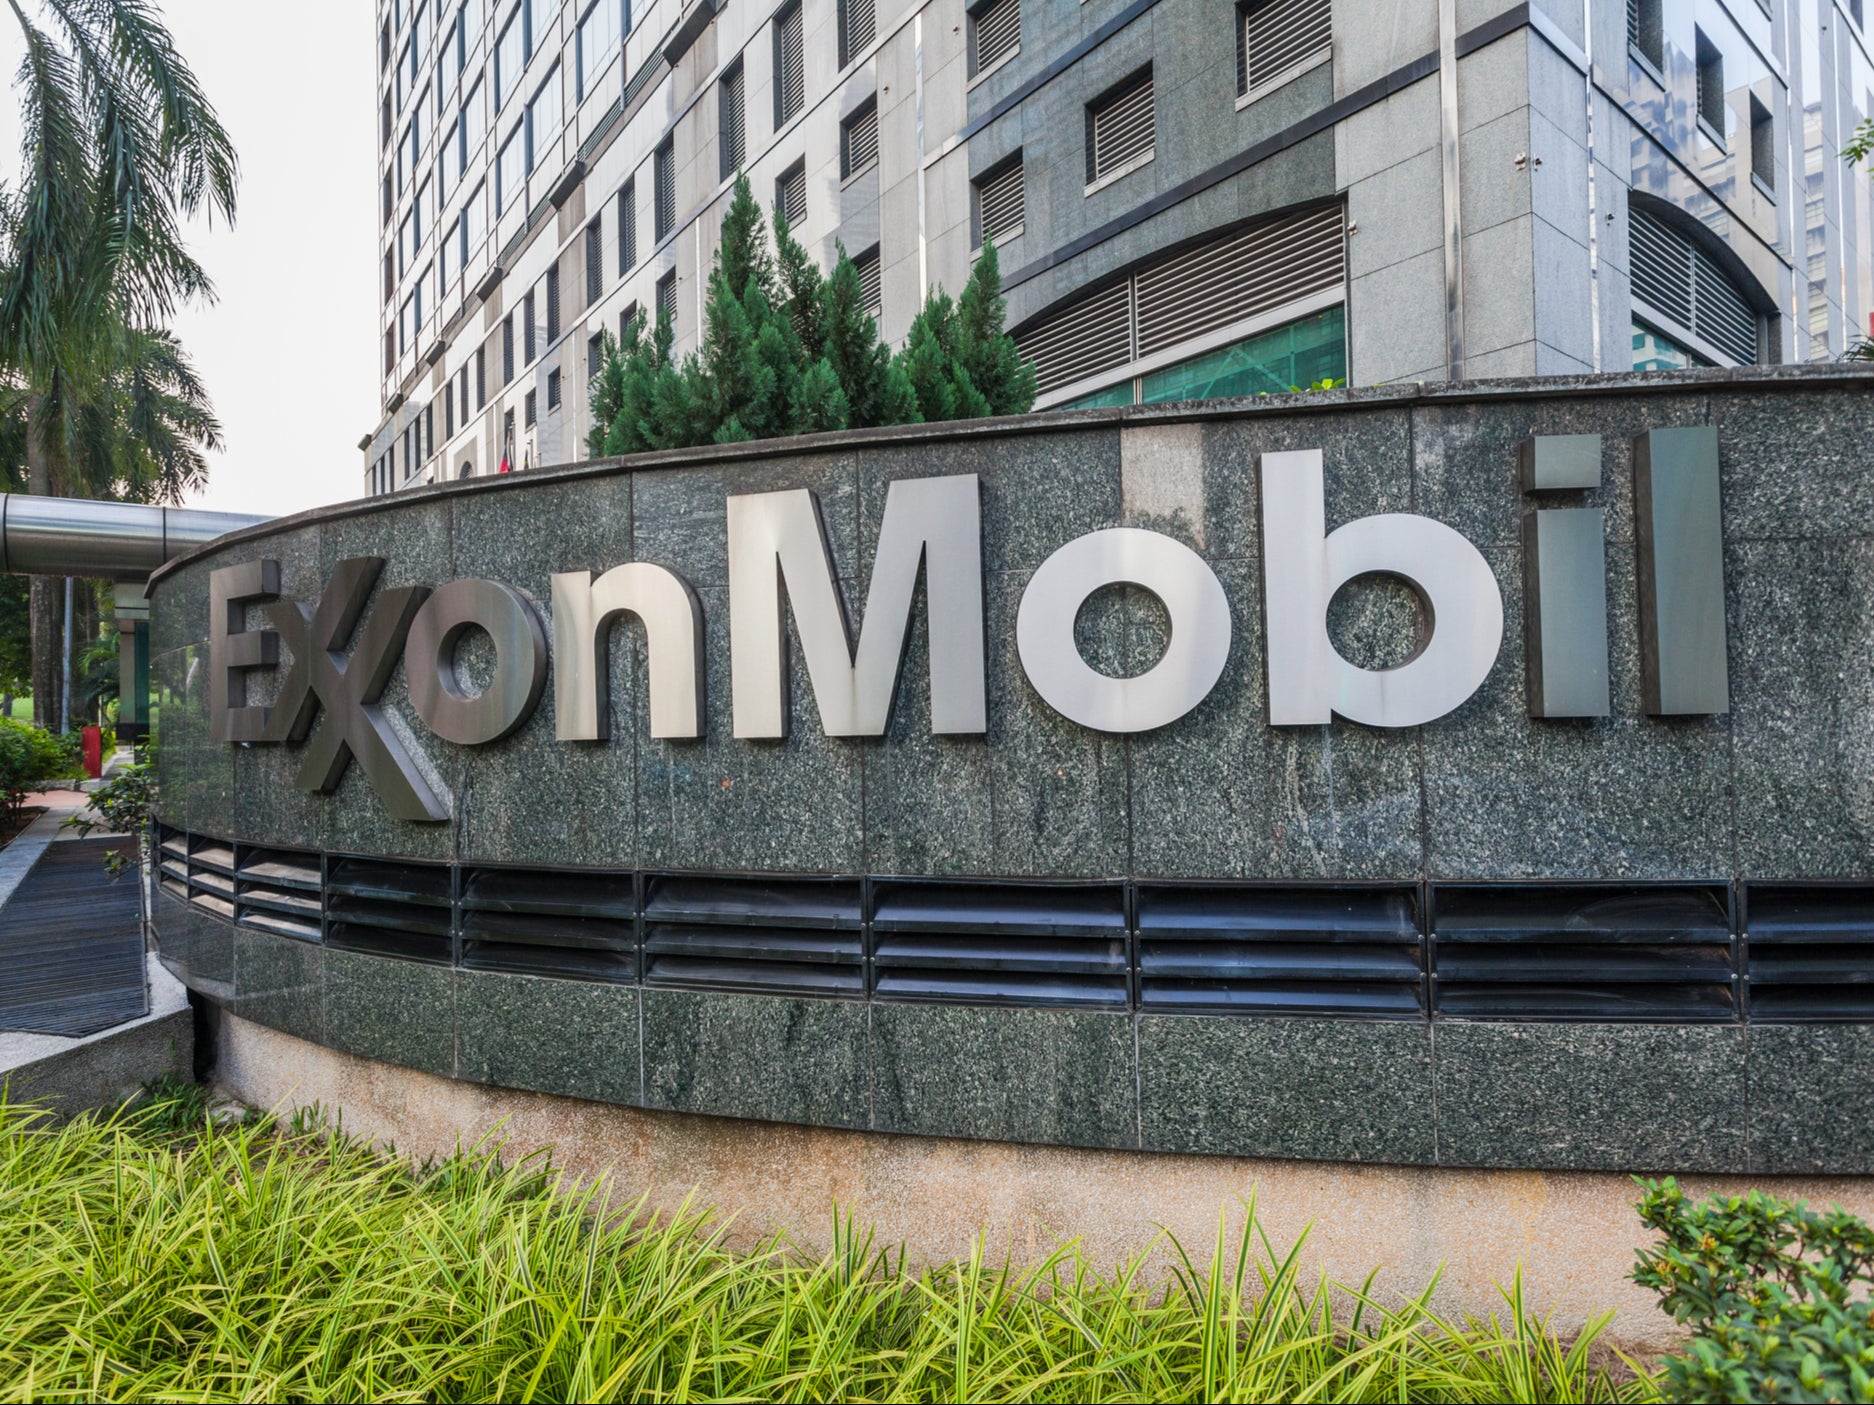 Texas-based Exxon Mobil is one of several international oil companies facing increased scrutiny over environmental impacts